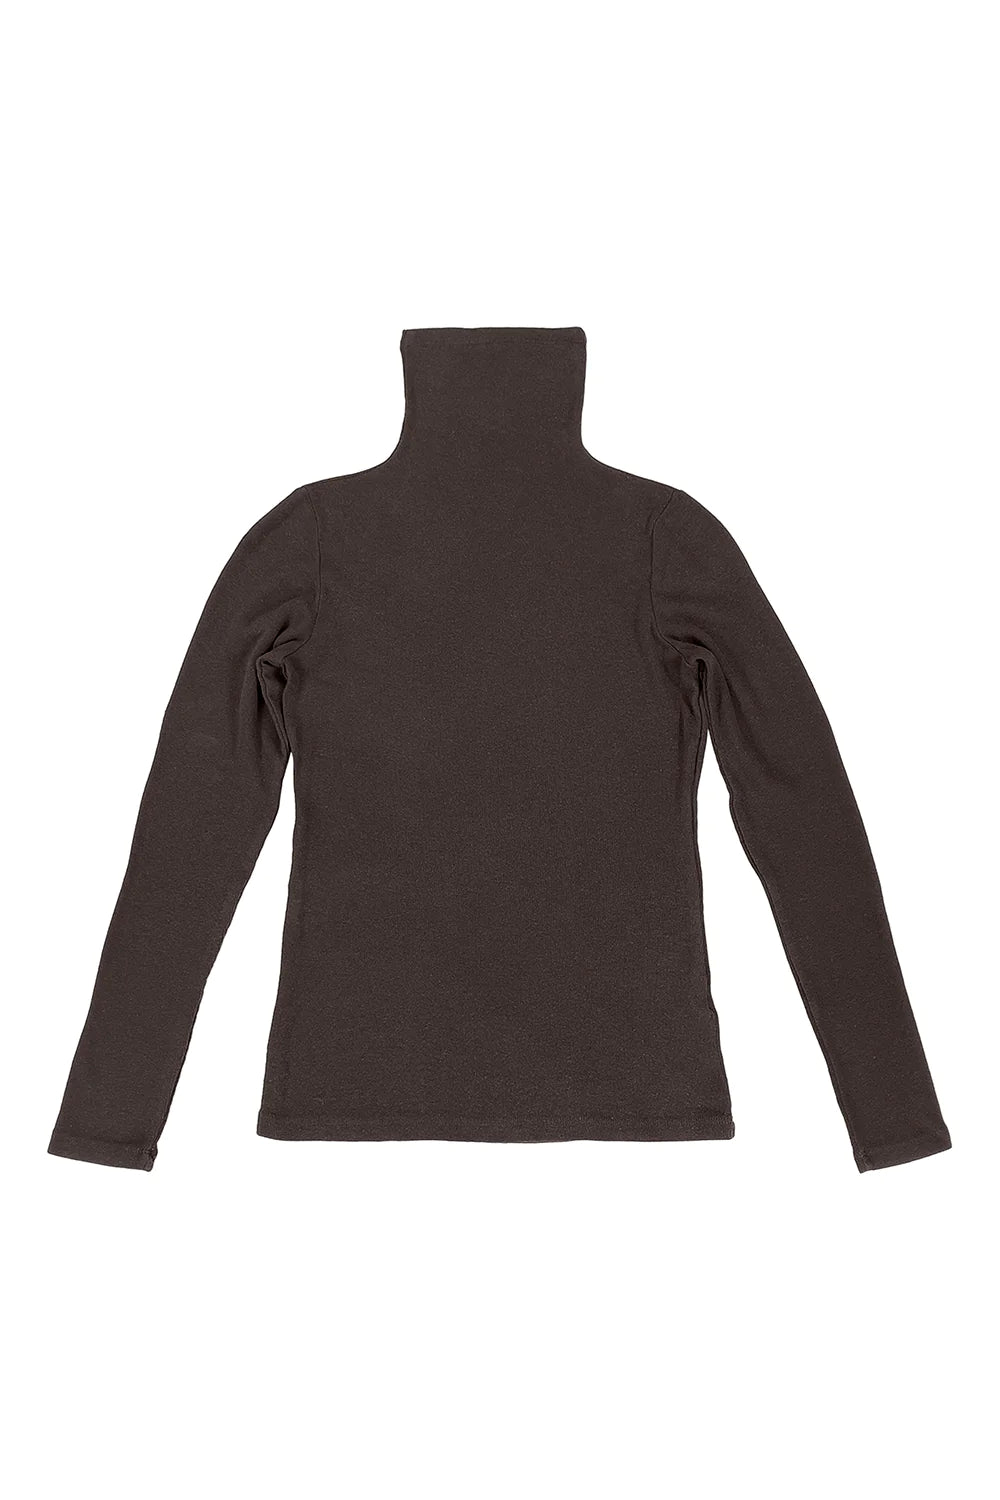 JUNGMAVEN Sustainable Hemp Clothing | Women's Classic Baby Rib Fitted Turtleneck | Made in USA | Garment Dyed Chocolate Brown Hemp Cotton Blend Fabric